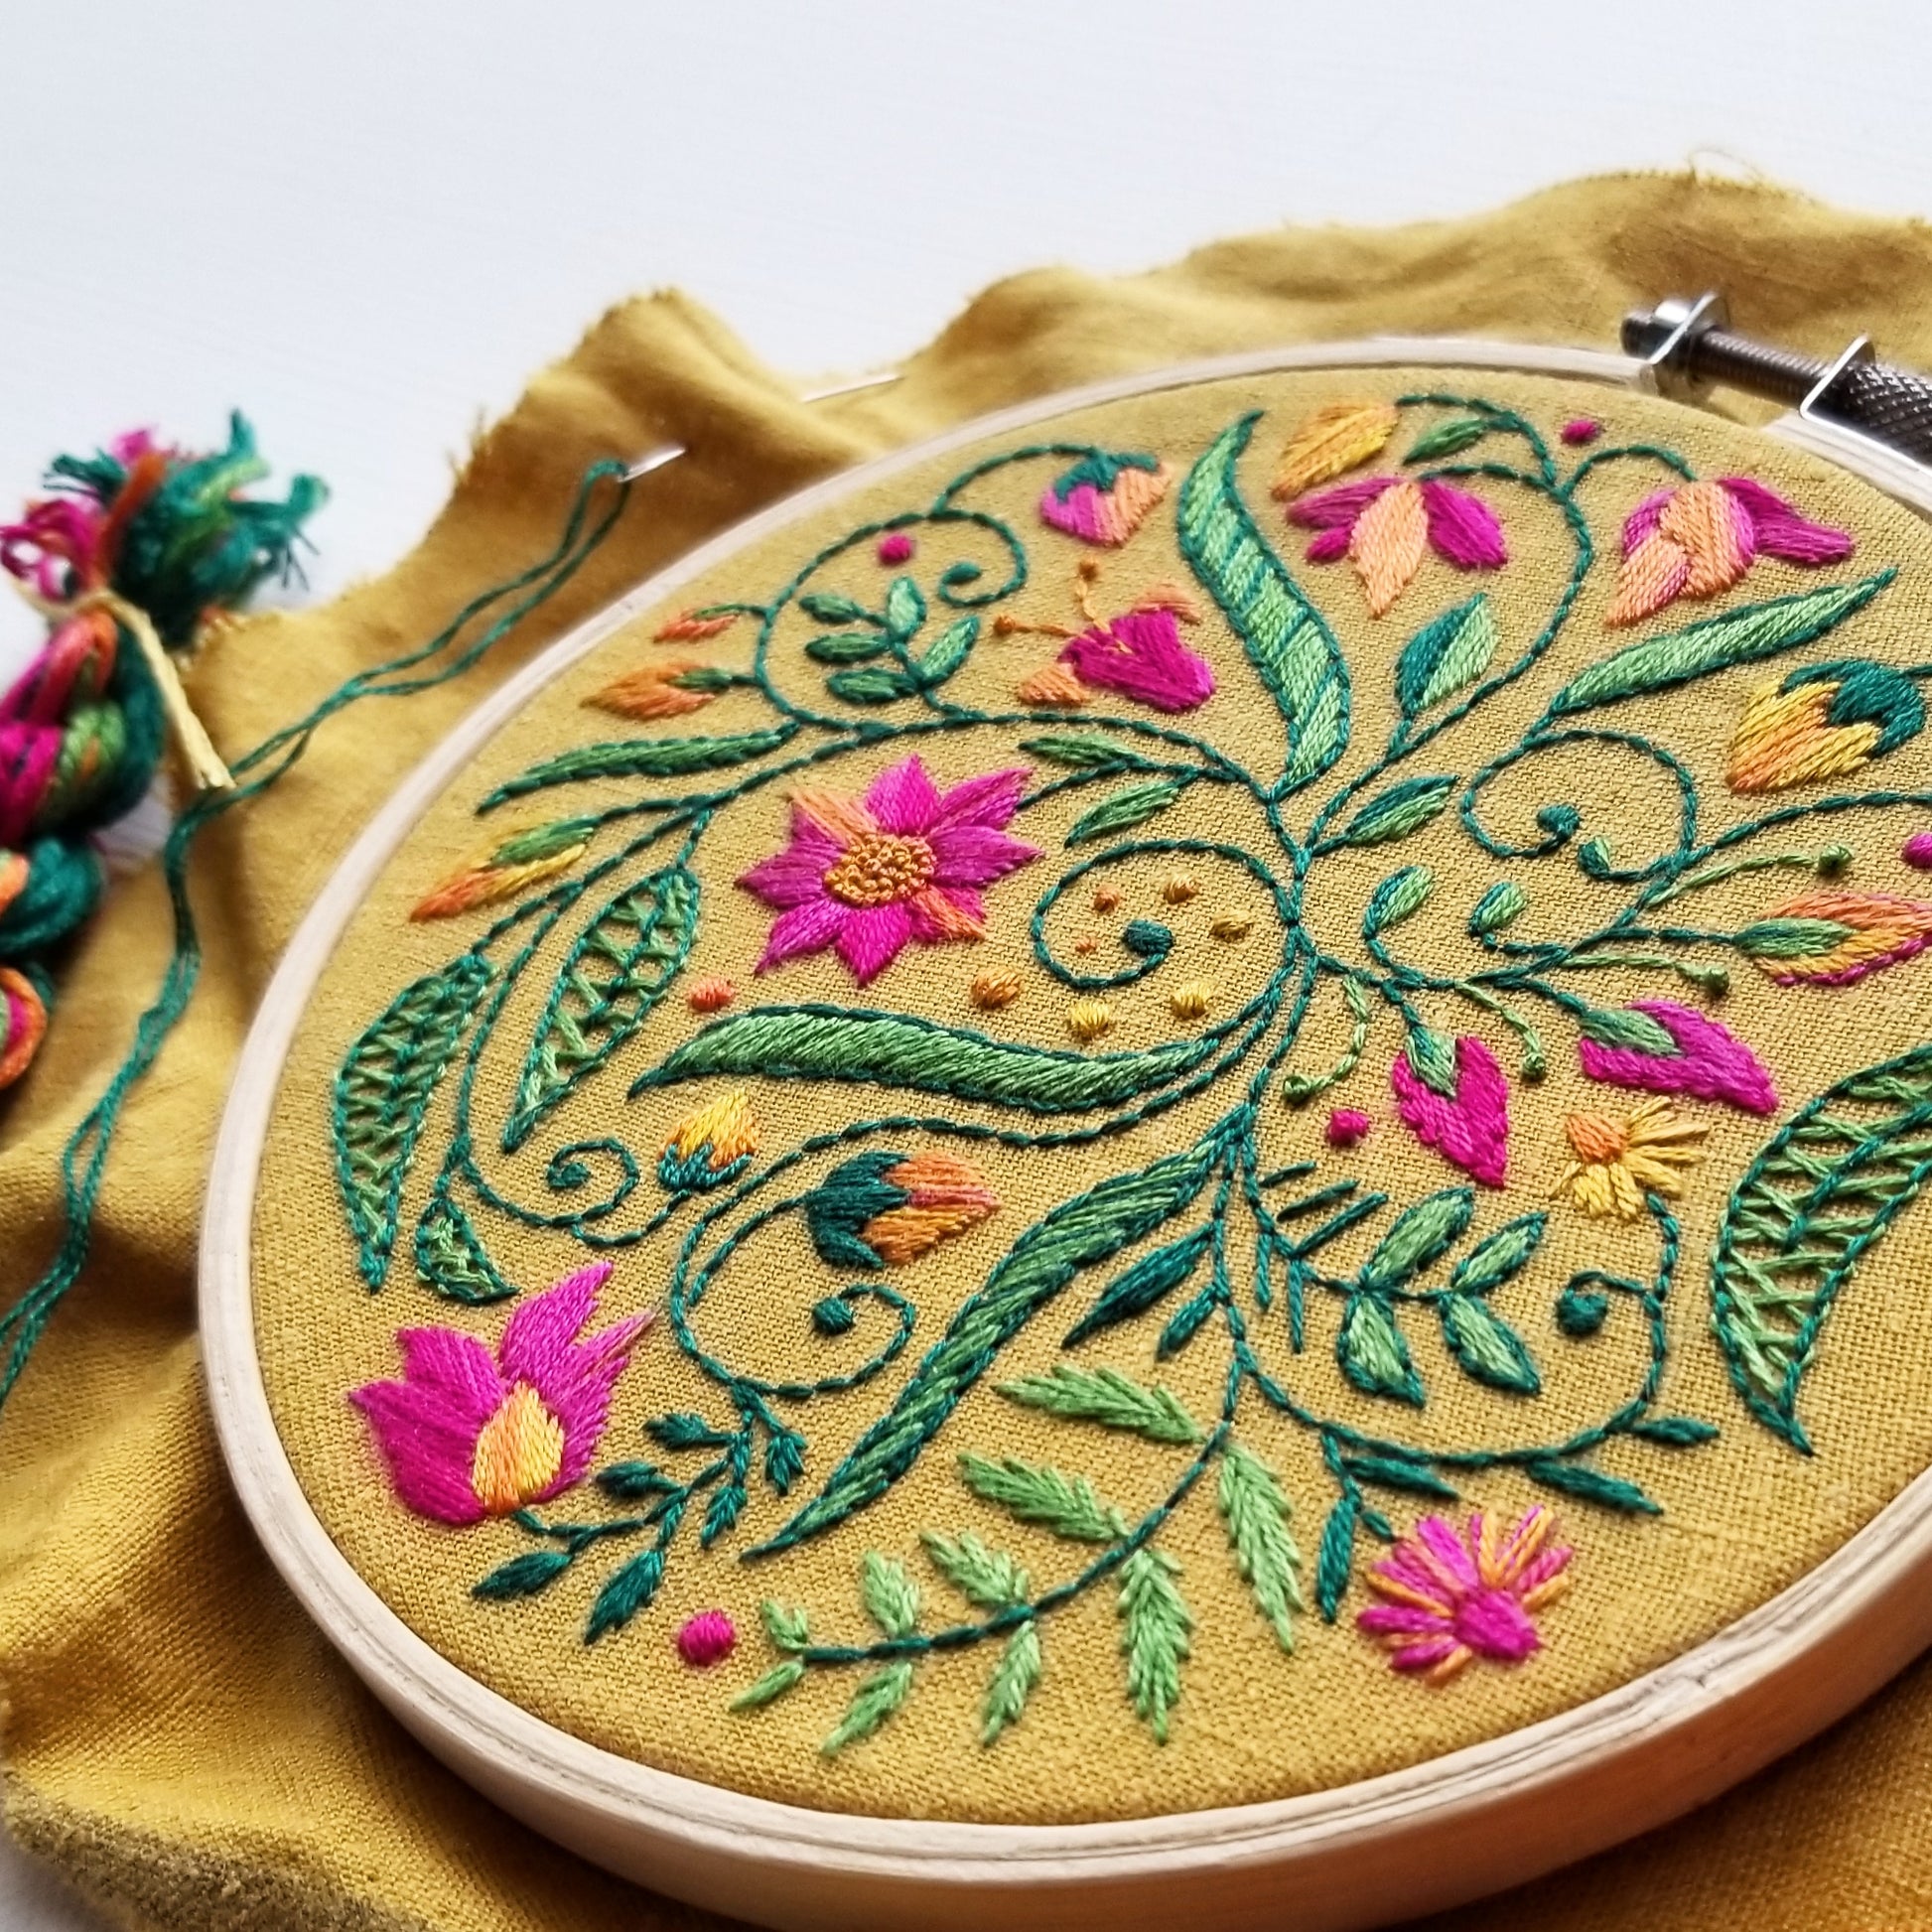 Embroidery, Embroidery Pattern